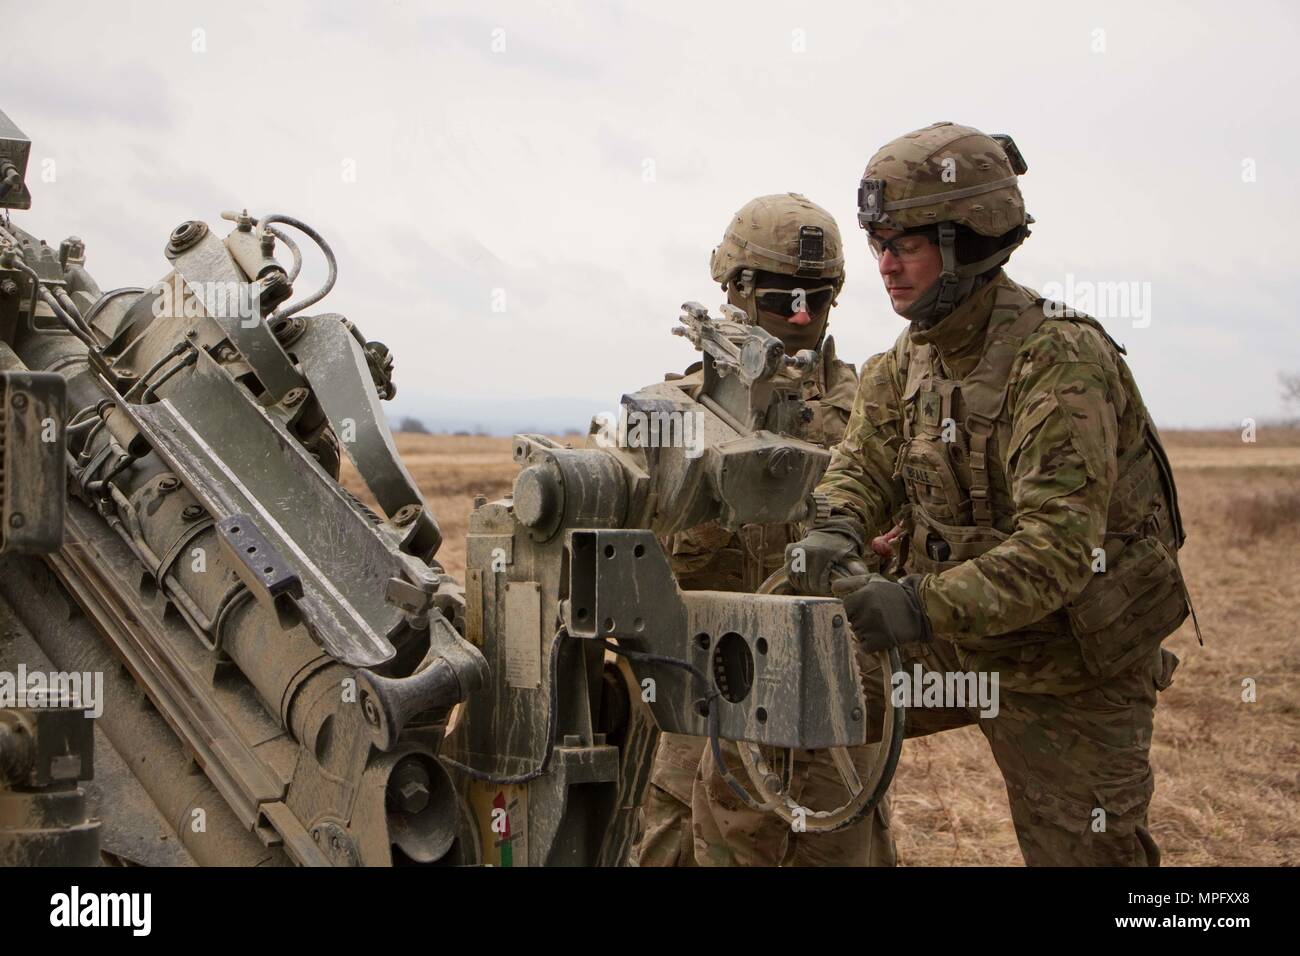 Sgt. David Beale (front), assistant gunner, and Spc. Vincent Ventarola, both members of the gun crew for 1st Section, 1st Platoon, Cobra Battery, Field Artillery Squadron, 2d Cavalry Regiment, U.S. Army, conduct a fire mission with their M777A2 Howitzer during a March 8, 2017 in the Grafenwoehr Training Area, Germany. The Squadron participated in Dynamic Front II March 6-9, 2017. The exercise enabled the U.S., Germany and Czech Republic to synchronize their artillery capabilities. (U.S. Army photo by Staff Sgt. Jennifer Bunn) Stock Photo